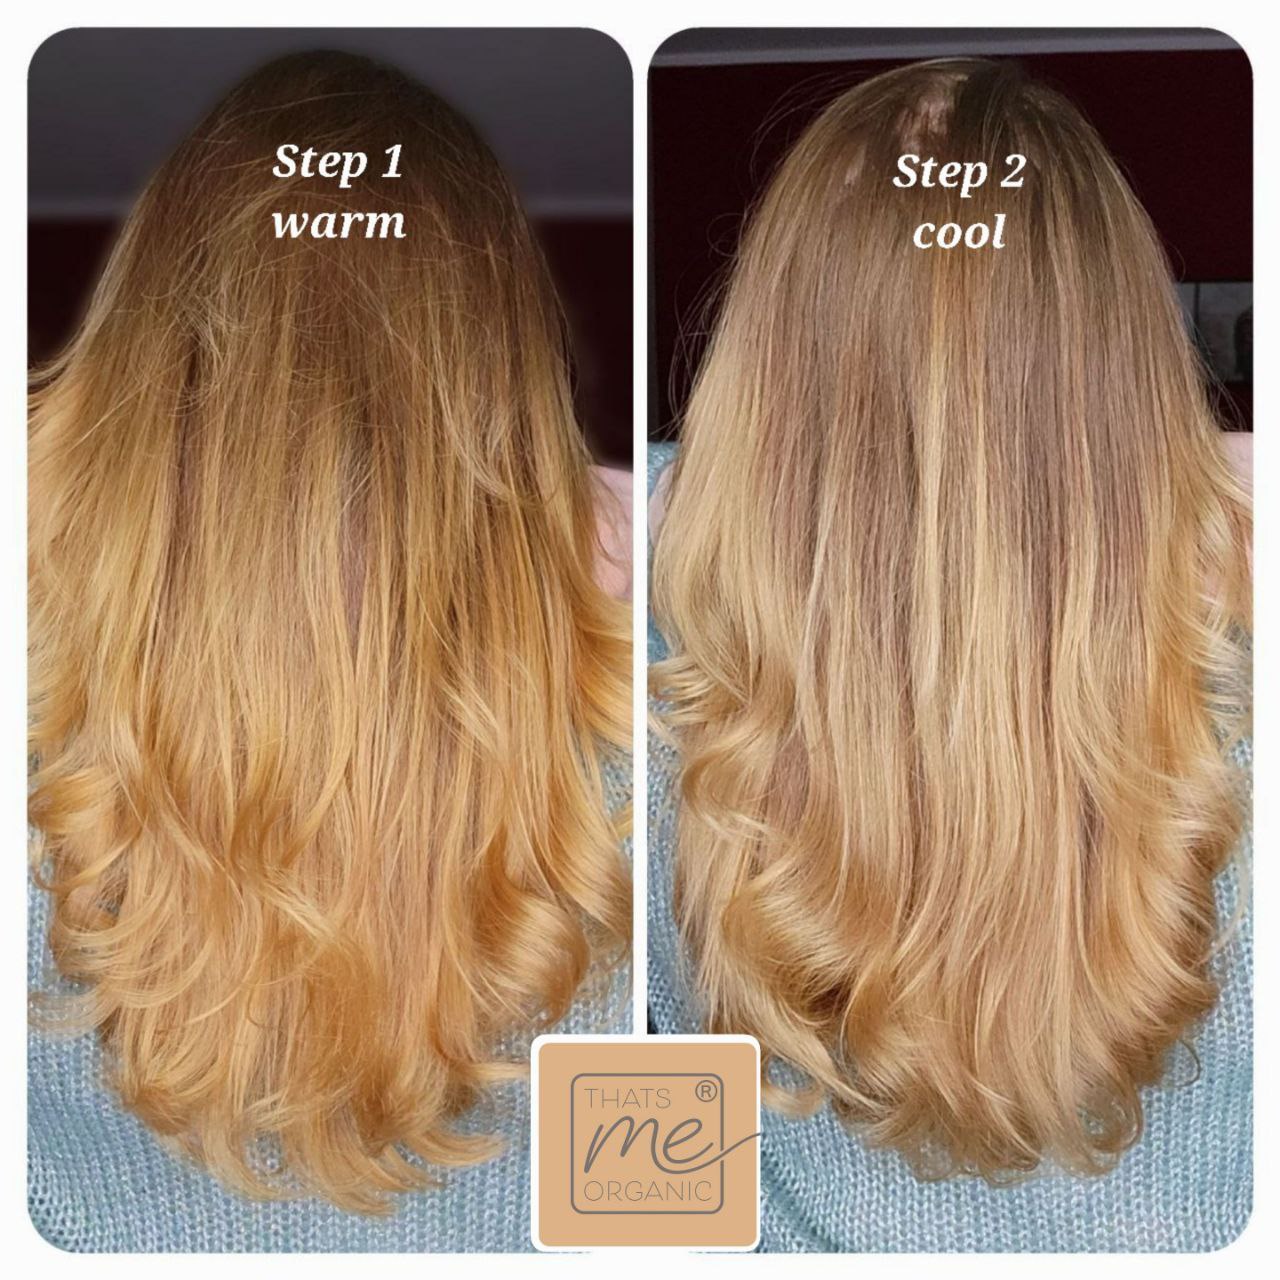 Professional plant hair color cool Sahara blonde "cool Sahara blonde in 2 steps" 2x 90g refill packs 